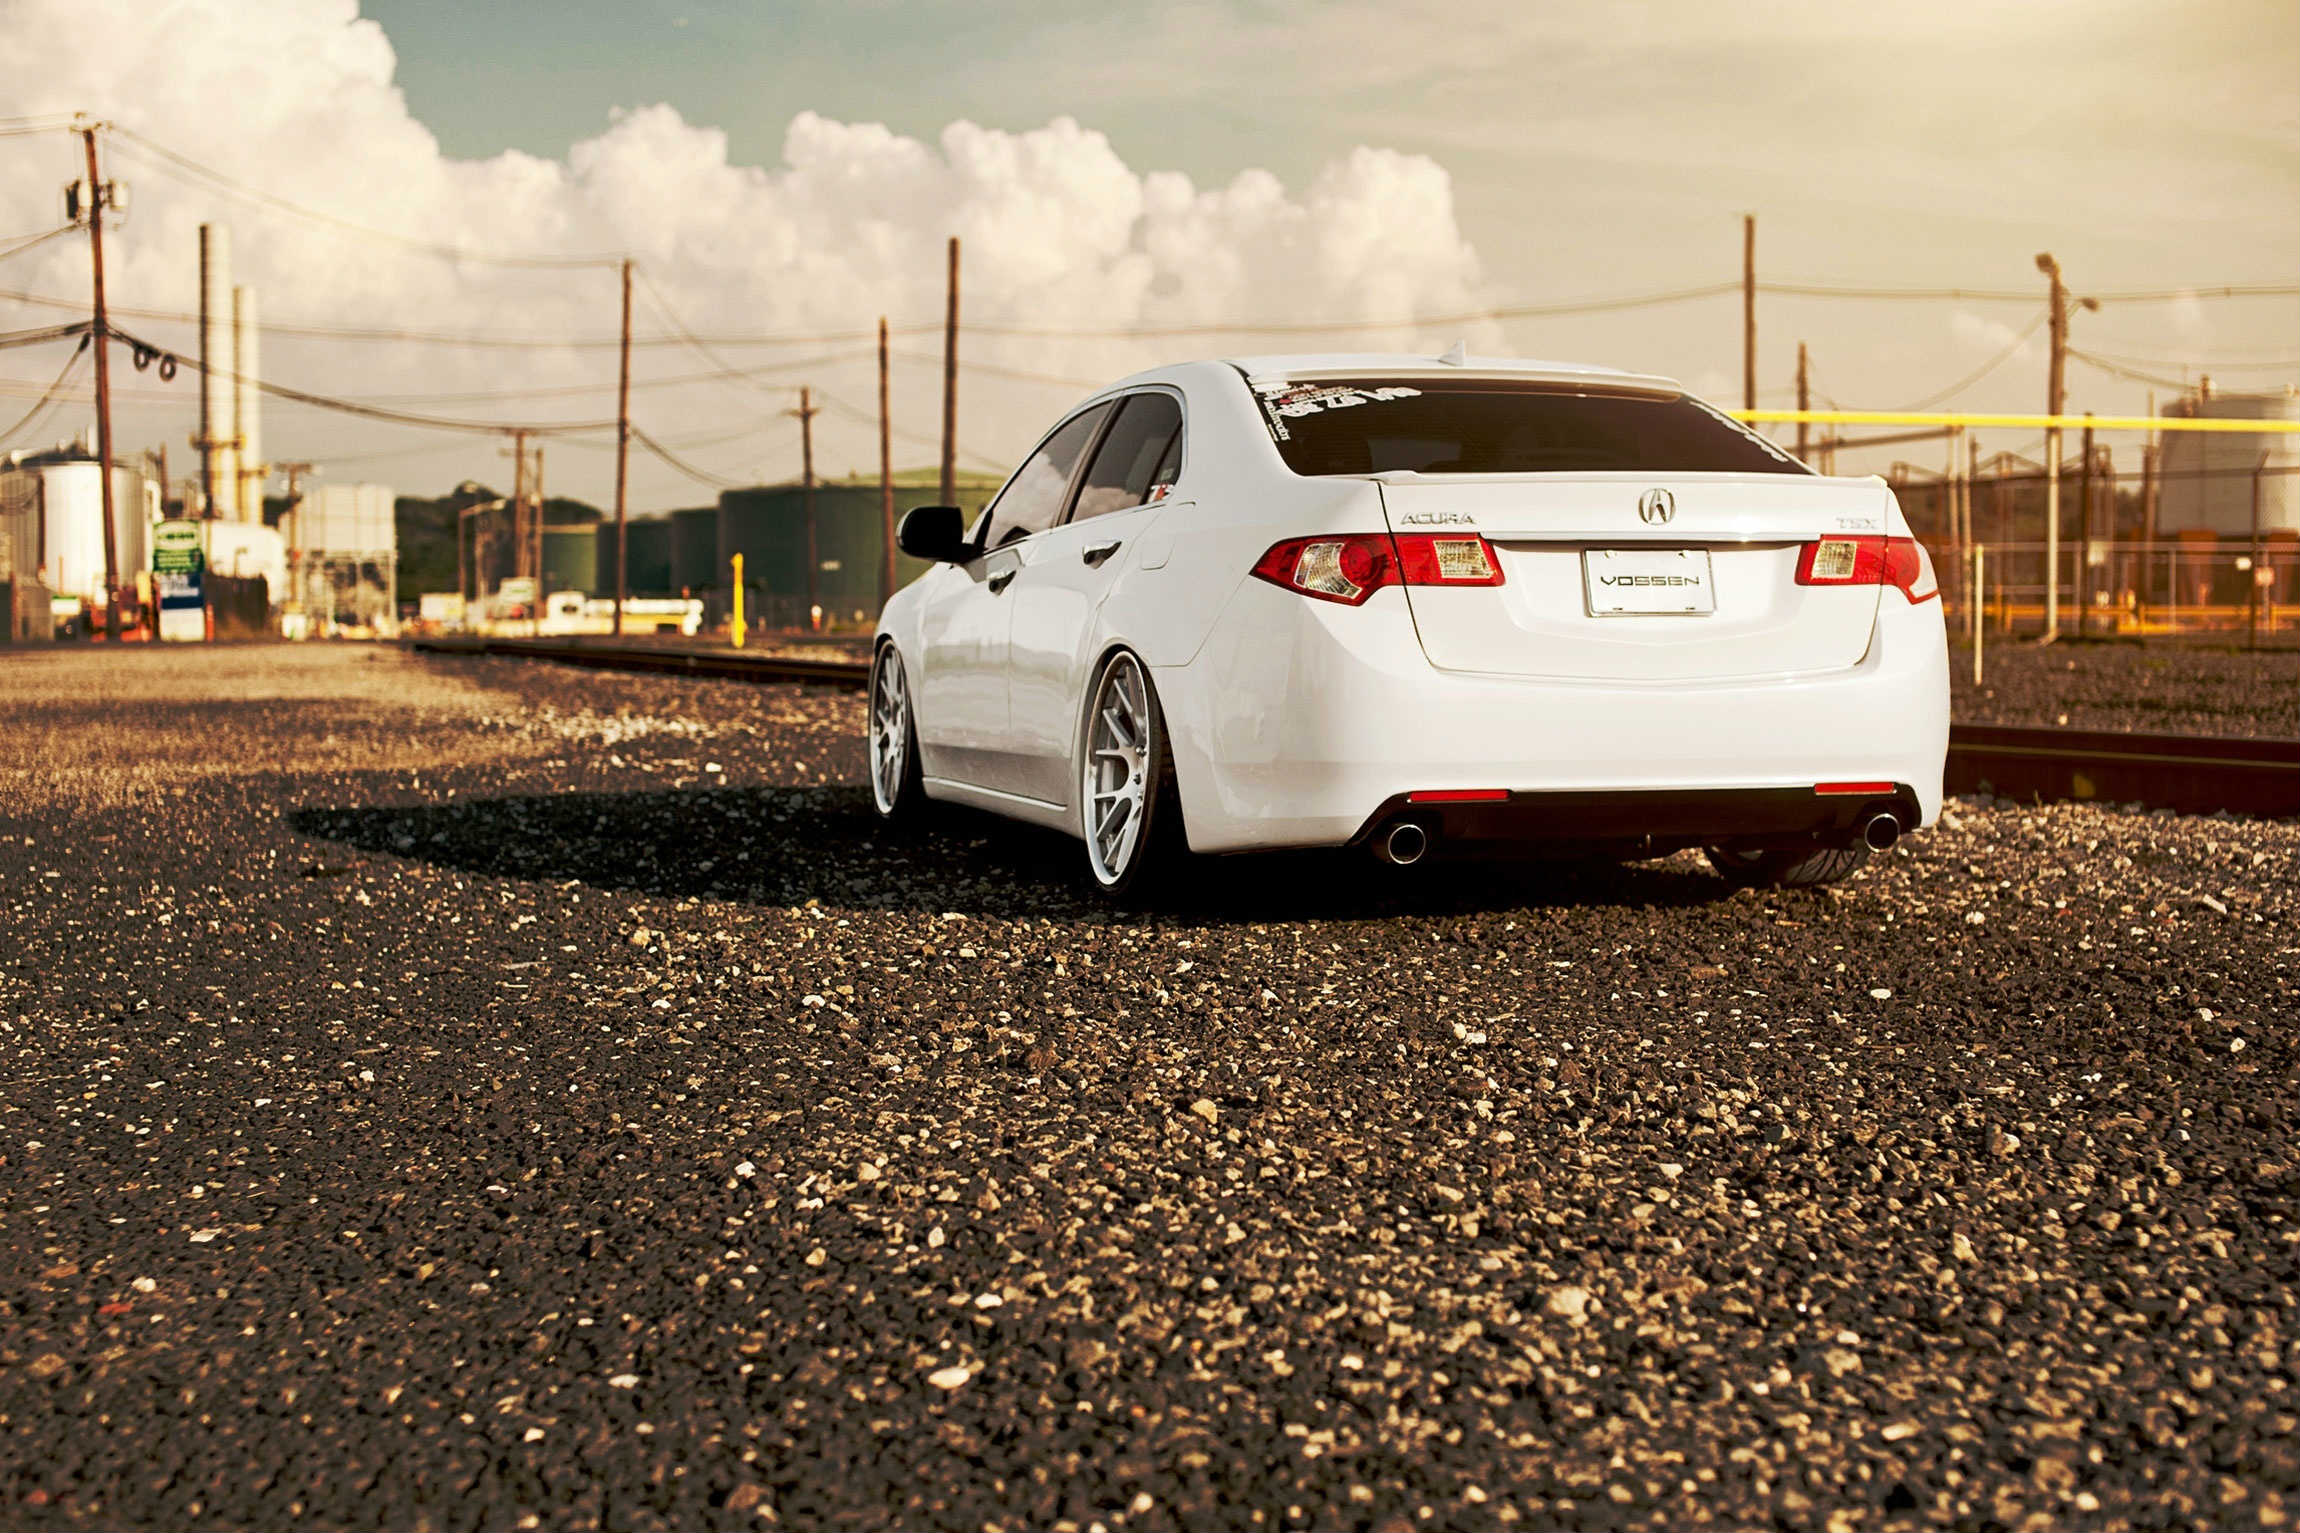 Free Download Acura Tsx Wallpaper 13 2300 X 1533 Stmednet 2300x1533 For Your Desktop Mobile Tablet Explore 34 Acura Tsx Wallpapers Acura Tsx Wallpapers Acura Wallpaper Acura Wallpapers